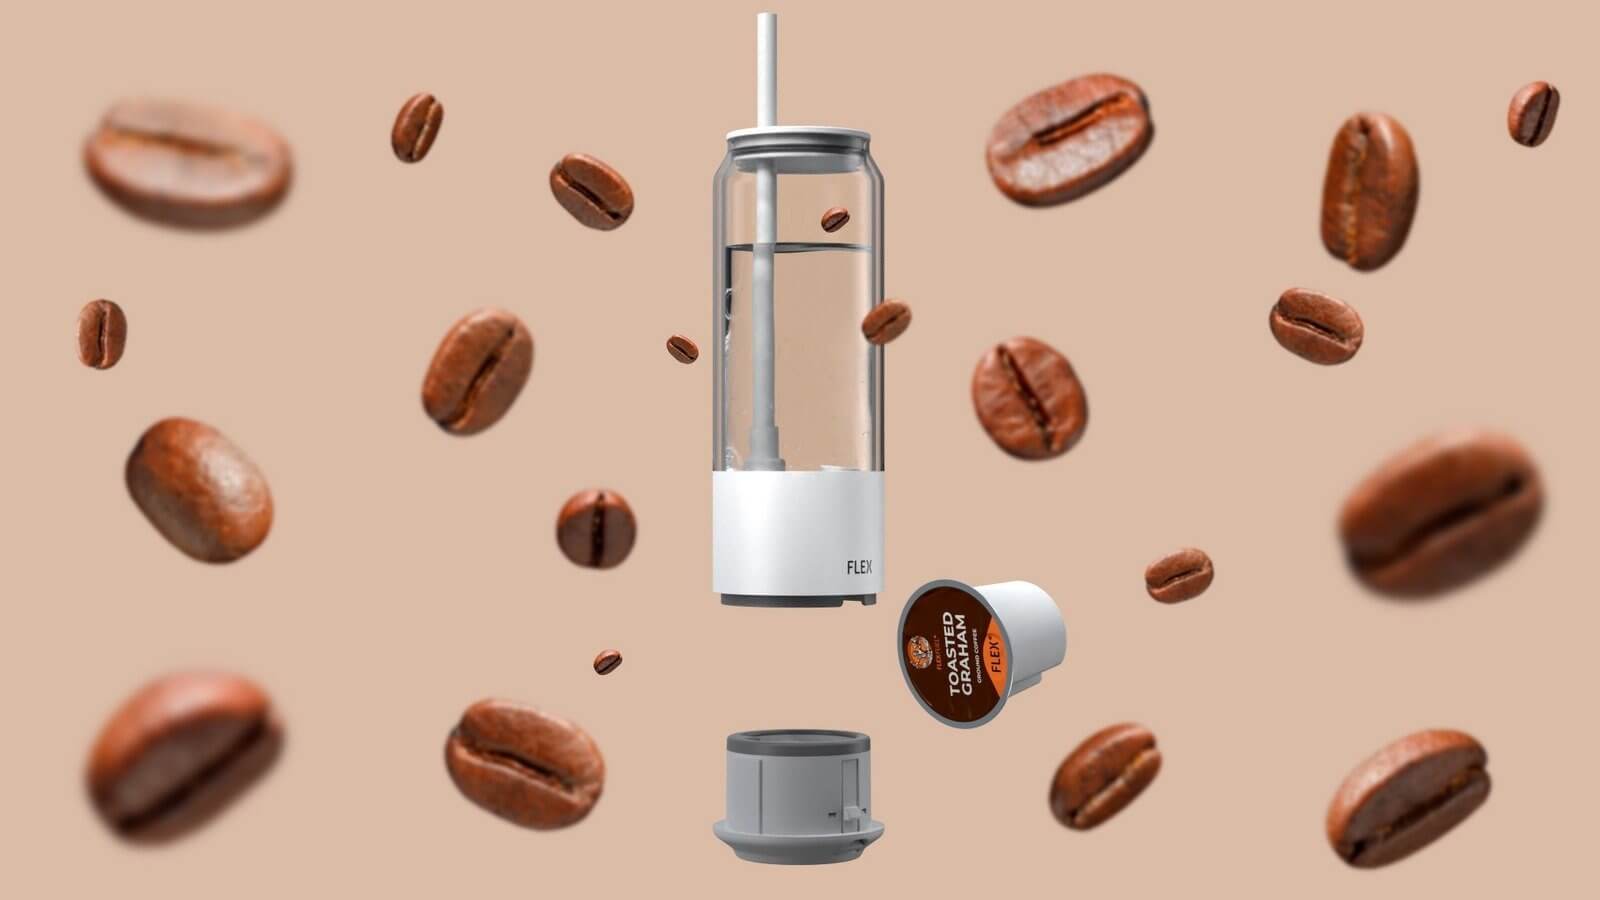 A creative presentation of the FLEX beverage system with its components separated on a beige background, surrounded by floating coffee beans. The image features the transparent FLEX CLEAR CAN, a white base unit, and a FUEL Pod labeled 'COFFEE', highlighting the ease of creating a fresh coffee experience. This engaging visual represents the anticipation of the upcoming FLEX product, inviting viewers to sign up and stay tuned for its release.